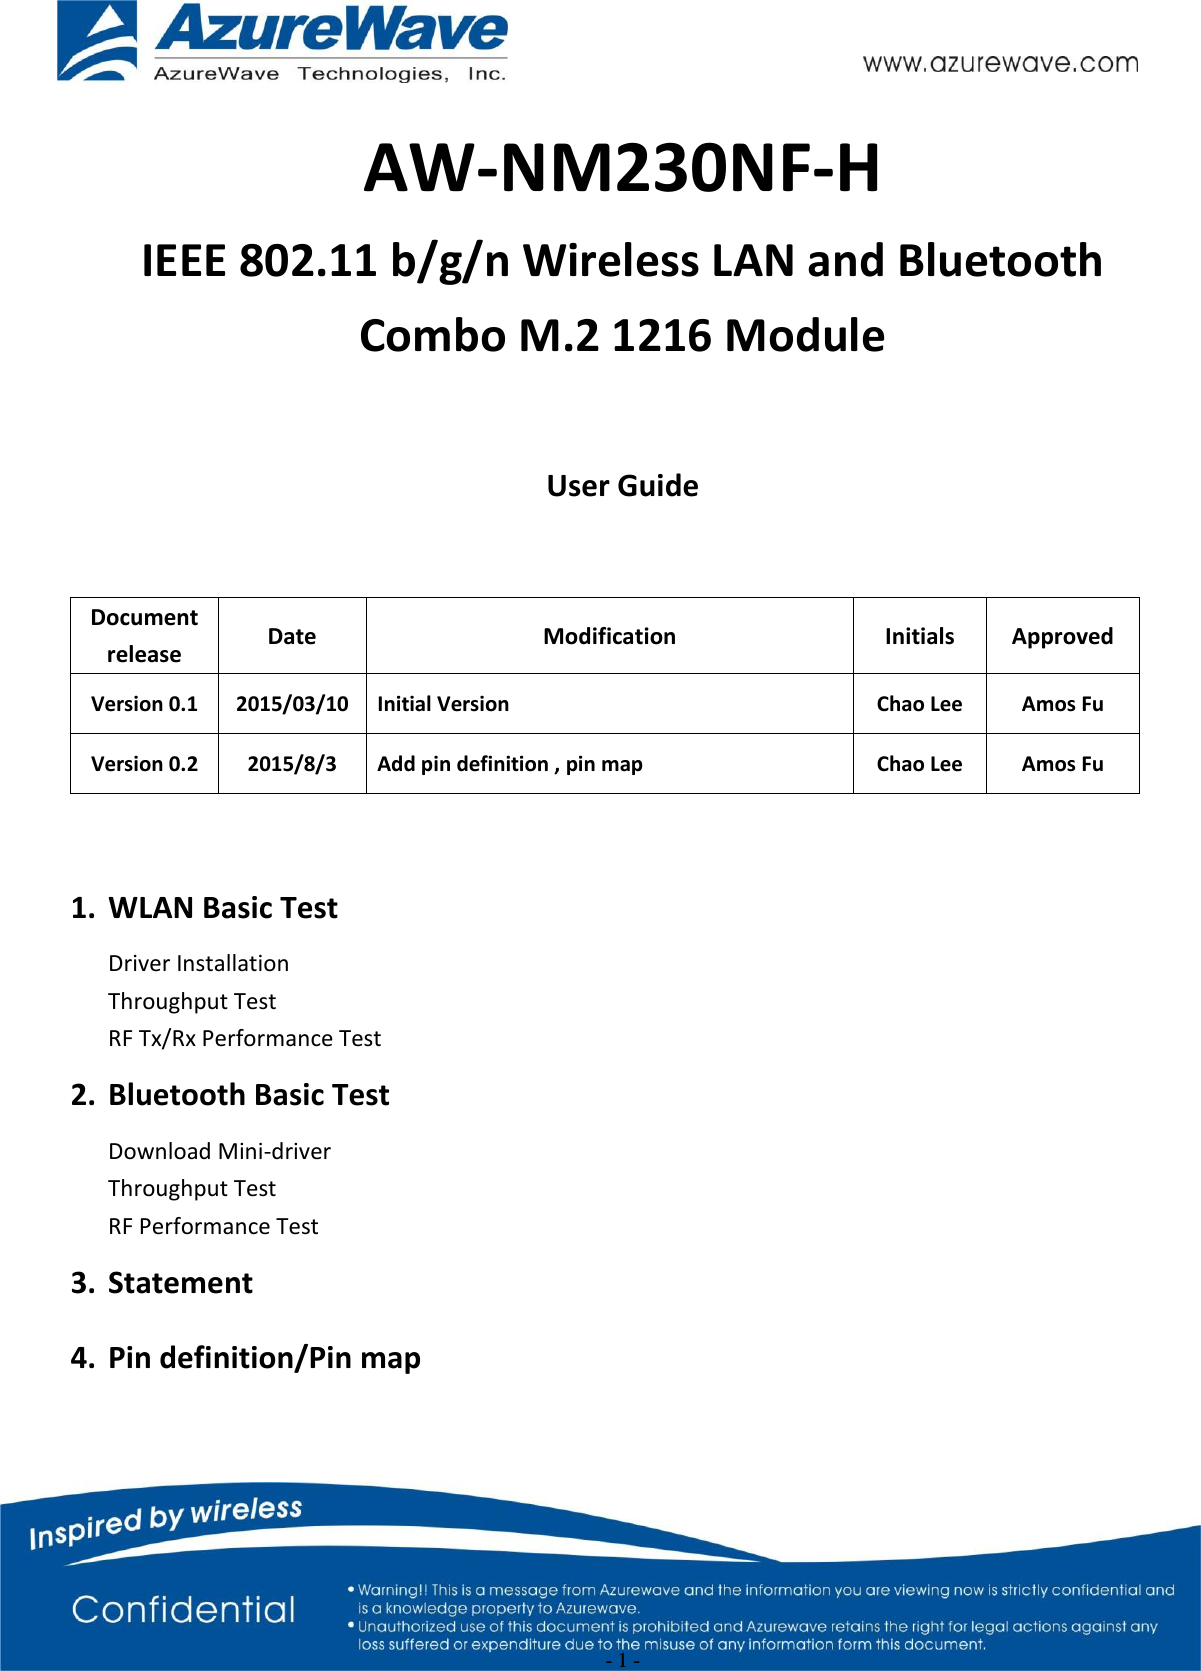  - 1 - AW-NM230NF-H IEEE 802.11 b/g/n Wireless LAN and Bluetooth Combo M.2 1216 Module  User Guide  Document release Date Modification Initials Approved Version 0.1 2015/03/10 Initial Version Chao Lee Amos Fu Version 0.2 2015/8/3 Add pin definition , pin map Chao Lee Amos Fu  1. WLAN Basic Test  Driver Installation  Throughput Test  RF Tx/Rx Performance Test 2. Bluetooth Basic Test  Download Mini-driver  Throughput Test  RF Performance Test 3. Statement 4. Pin definition/Pin map 